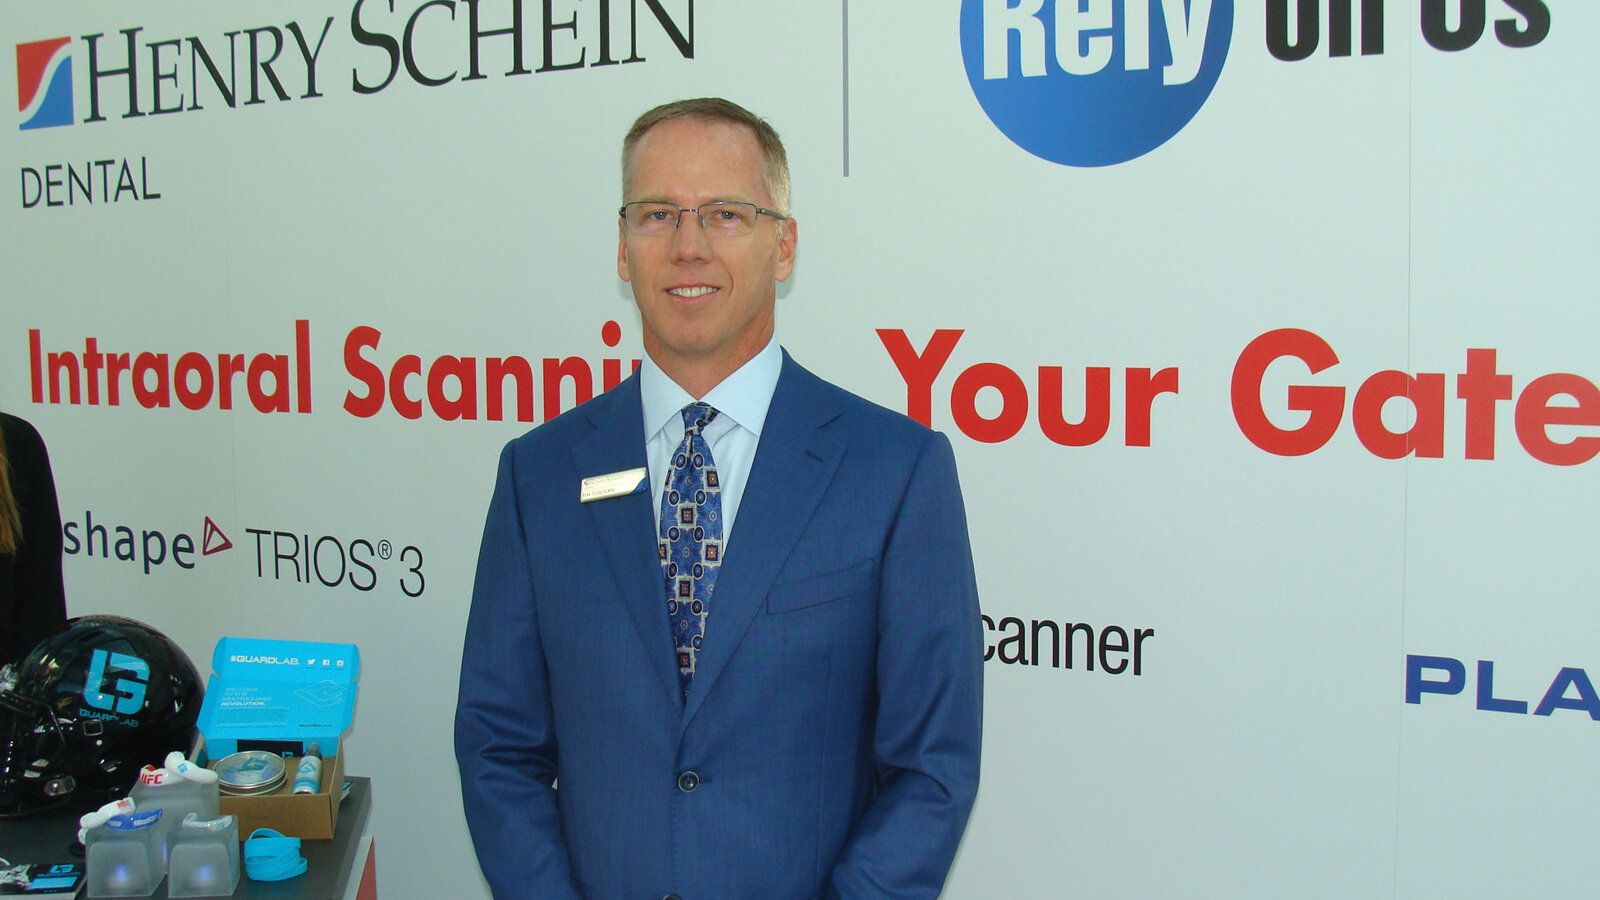 Henry Schein to showcase digital solutions at Greater New York Dental Meeting